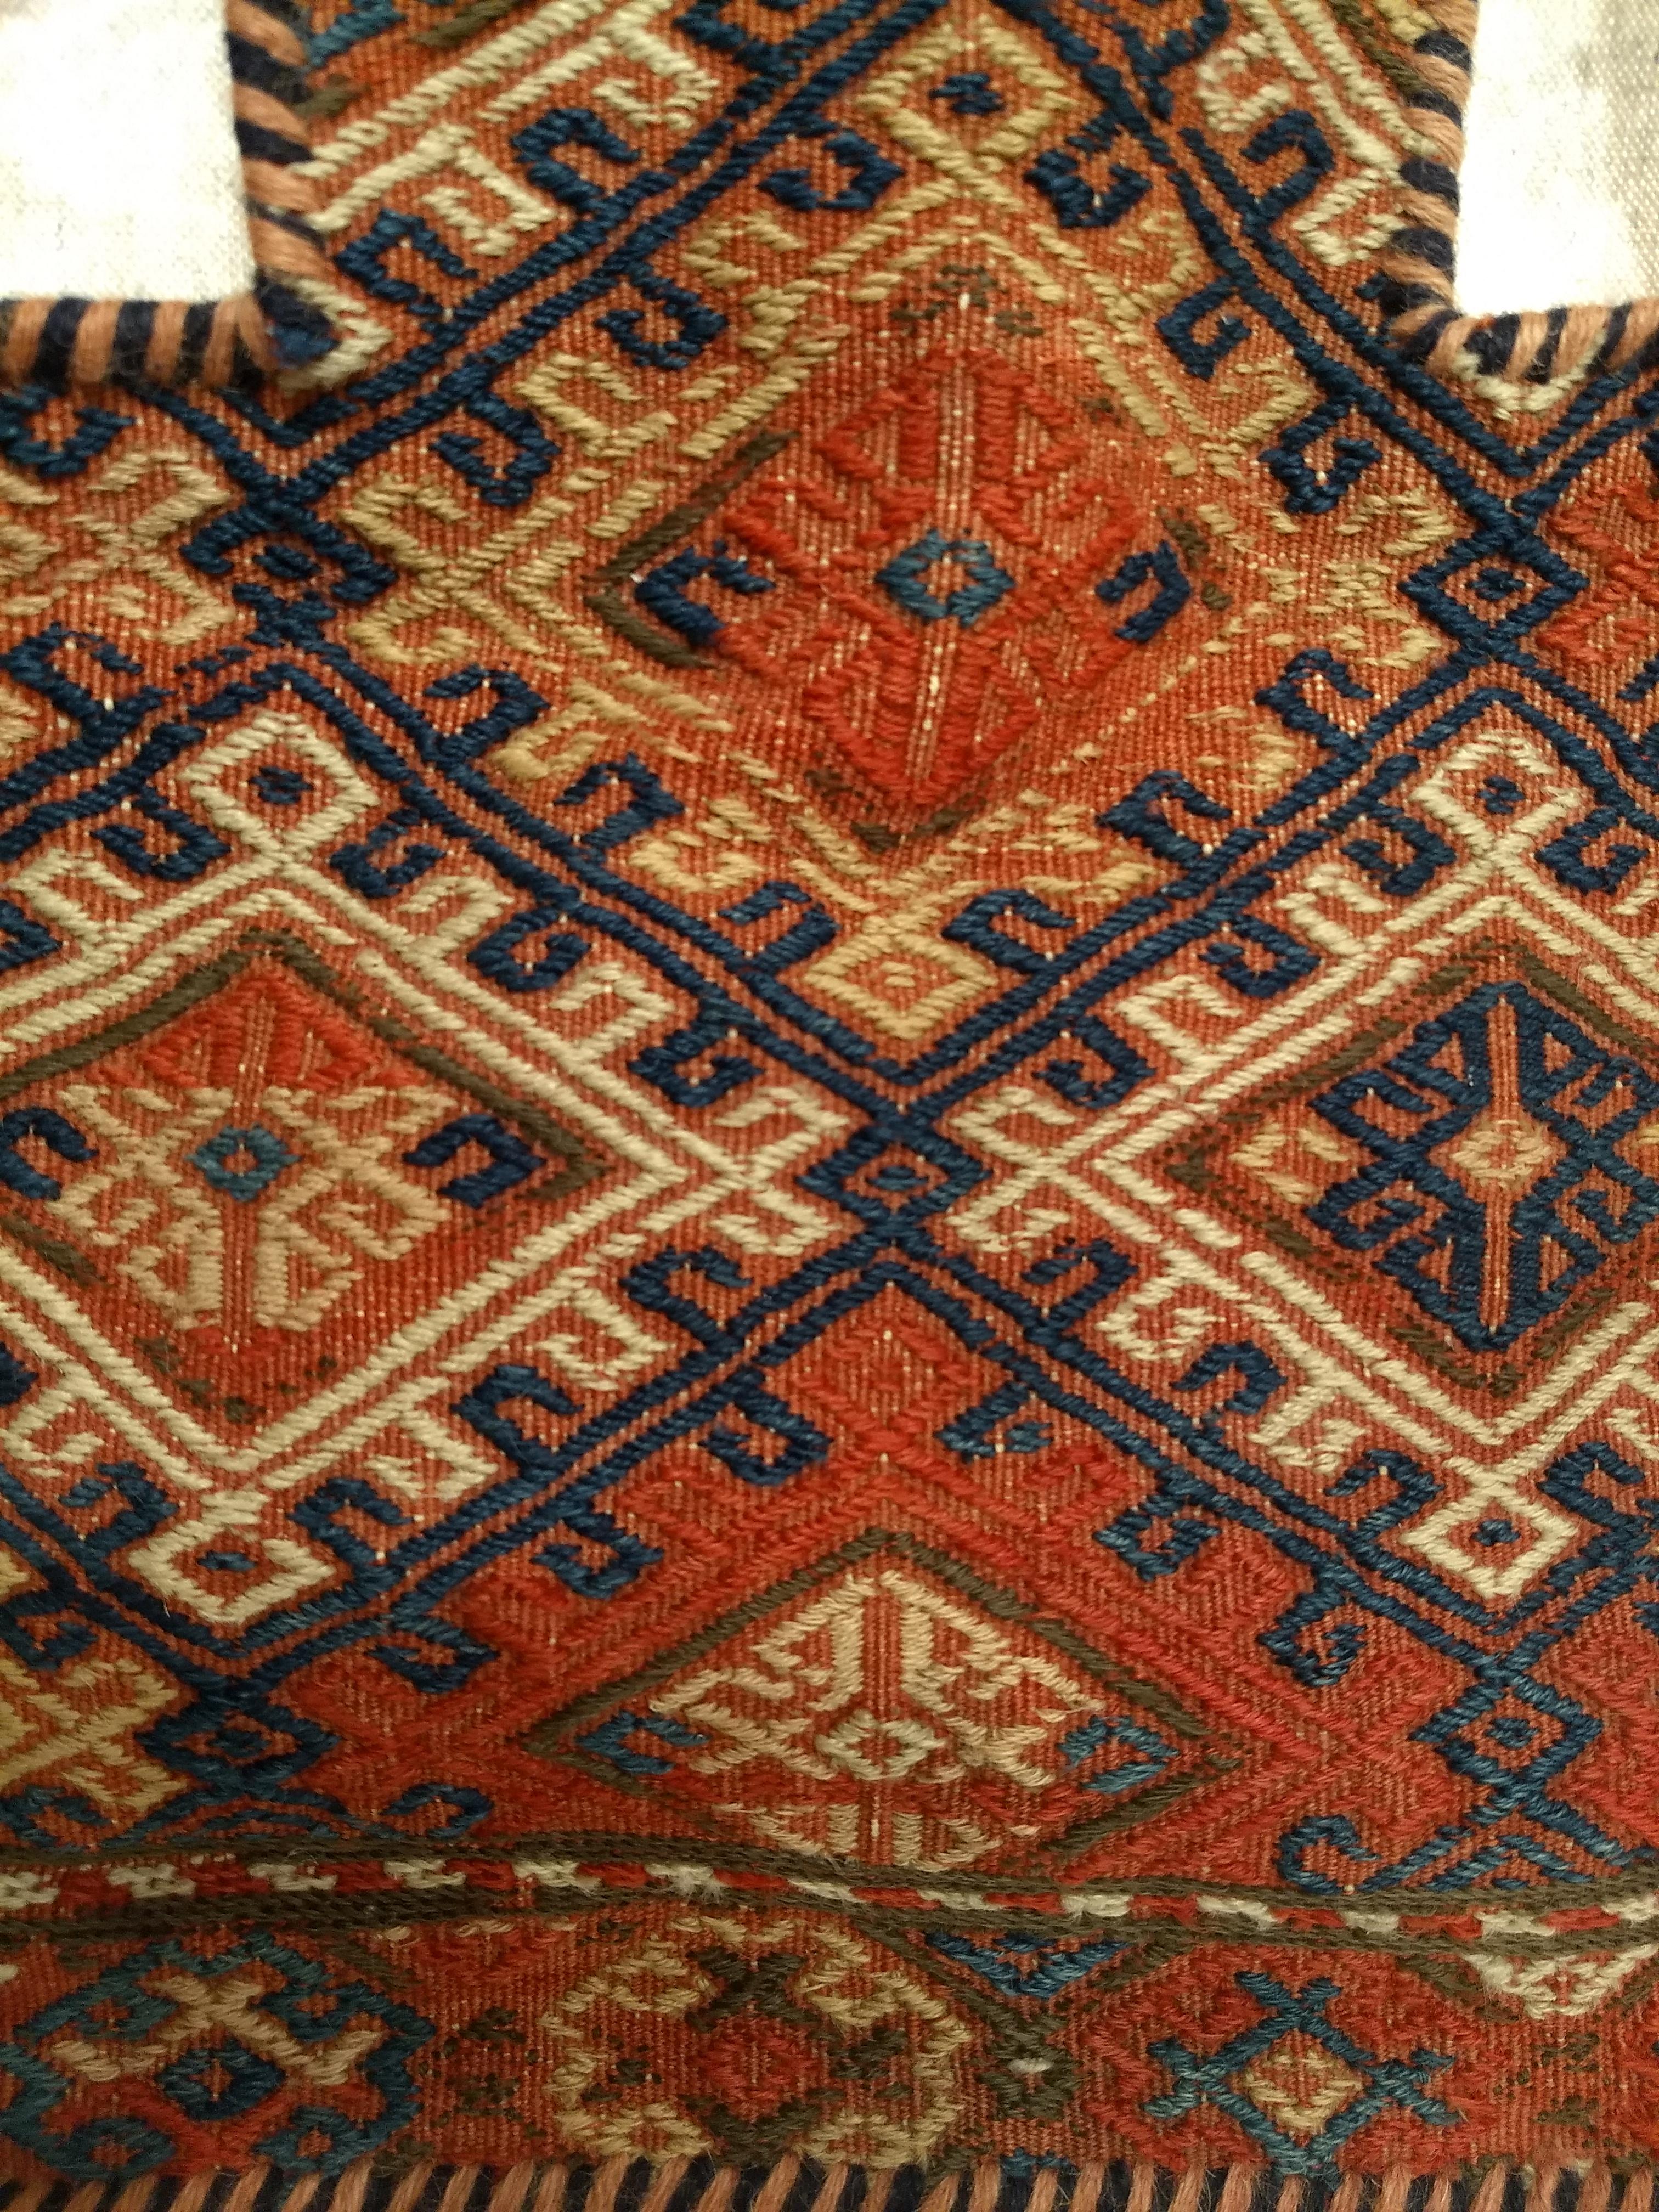 Vegetable Dyed Vintage Persian Baluch Soumak Salt Bag in Red, Blue, Brown as Tribal Wall Art For Sale